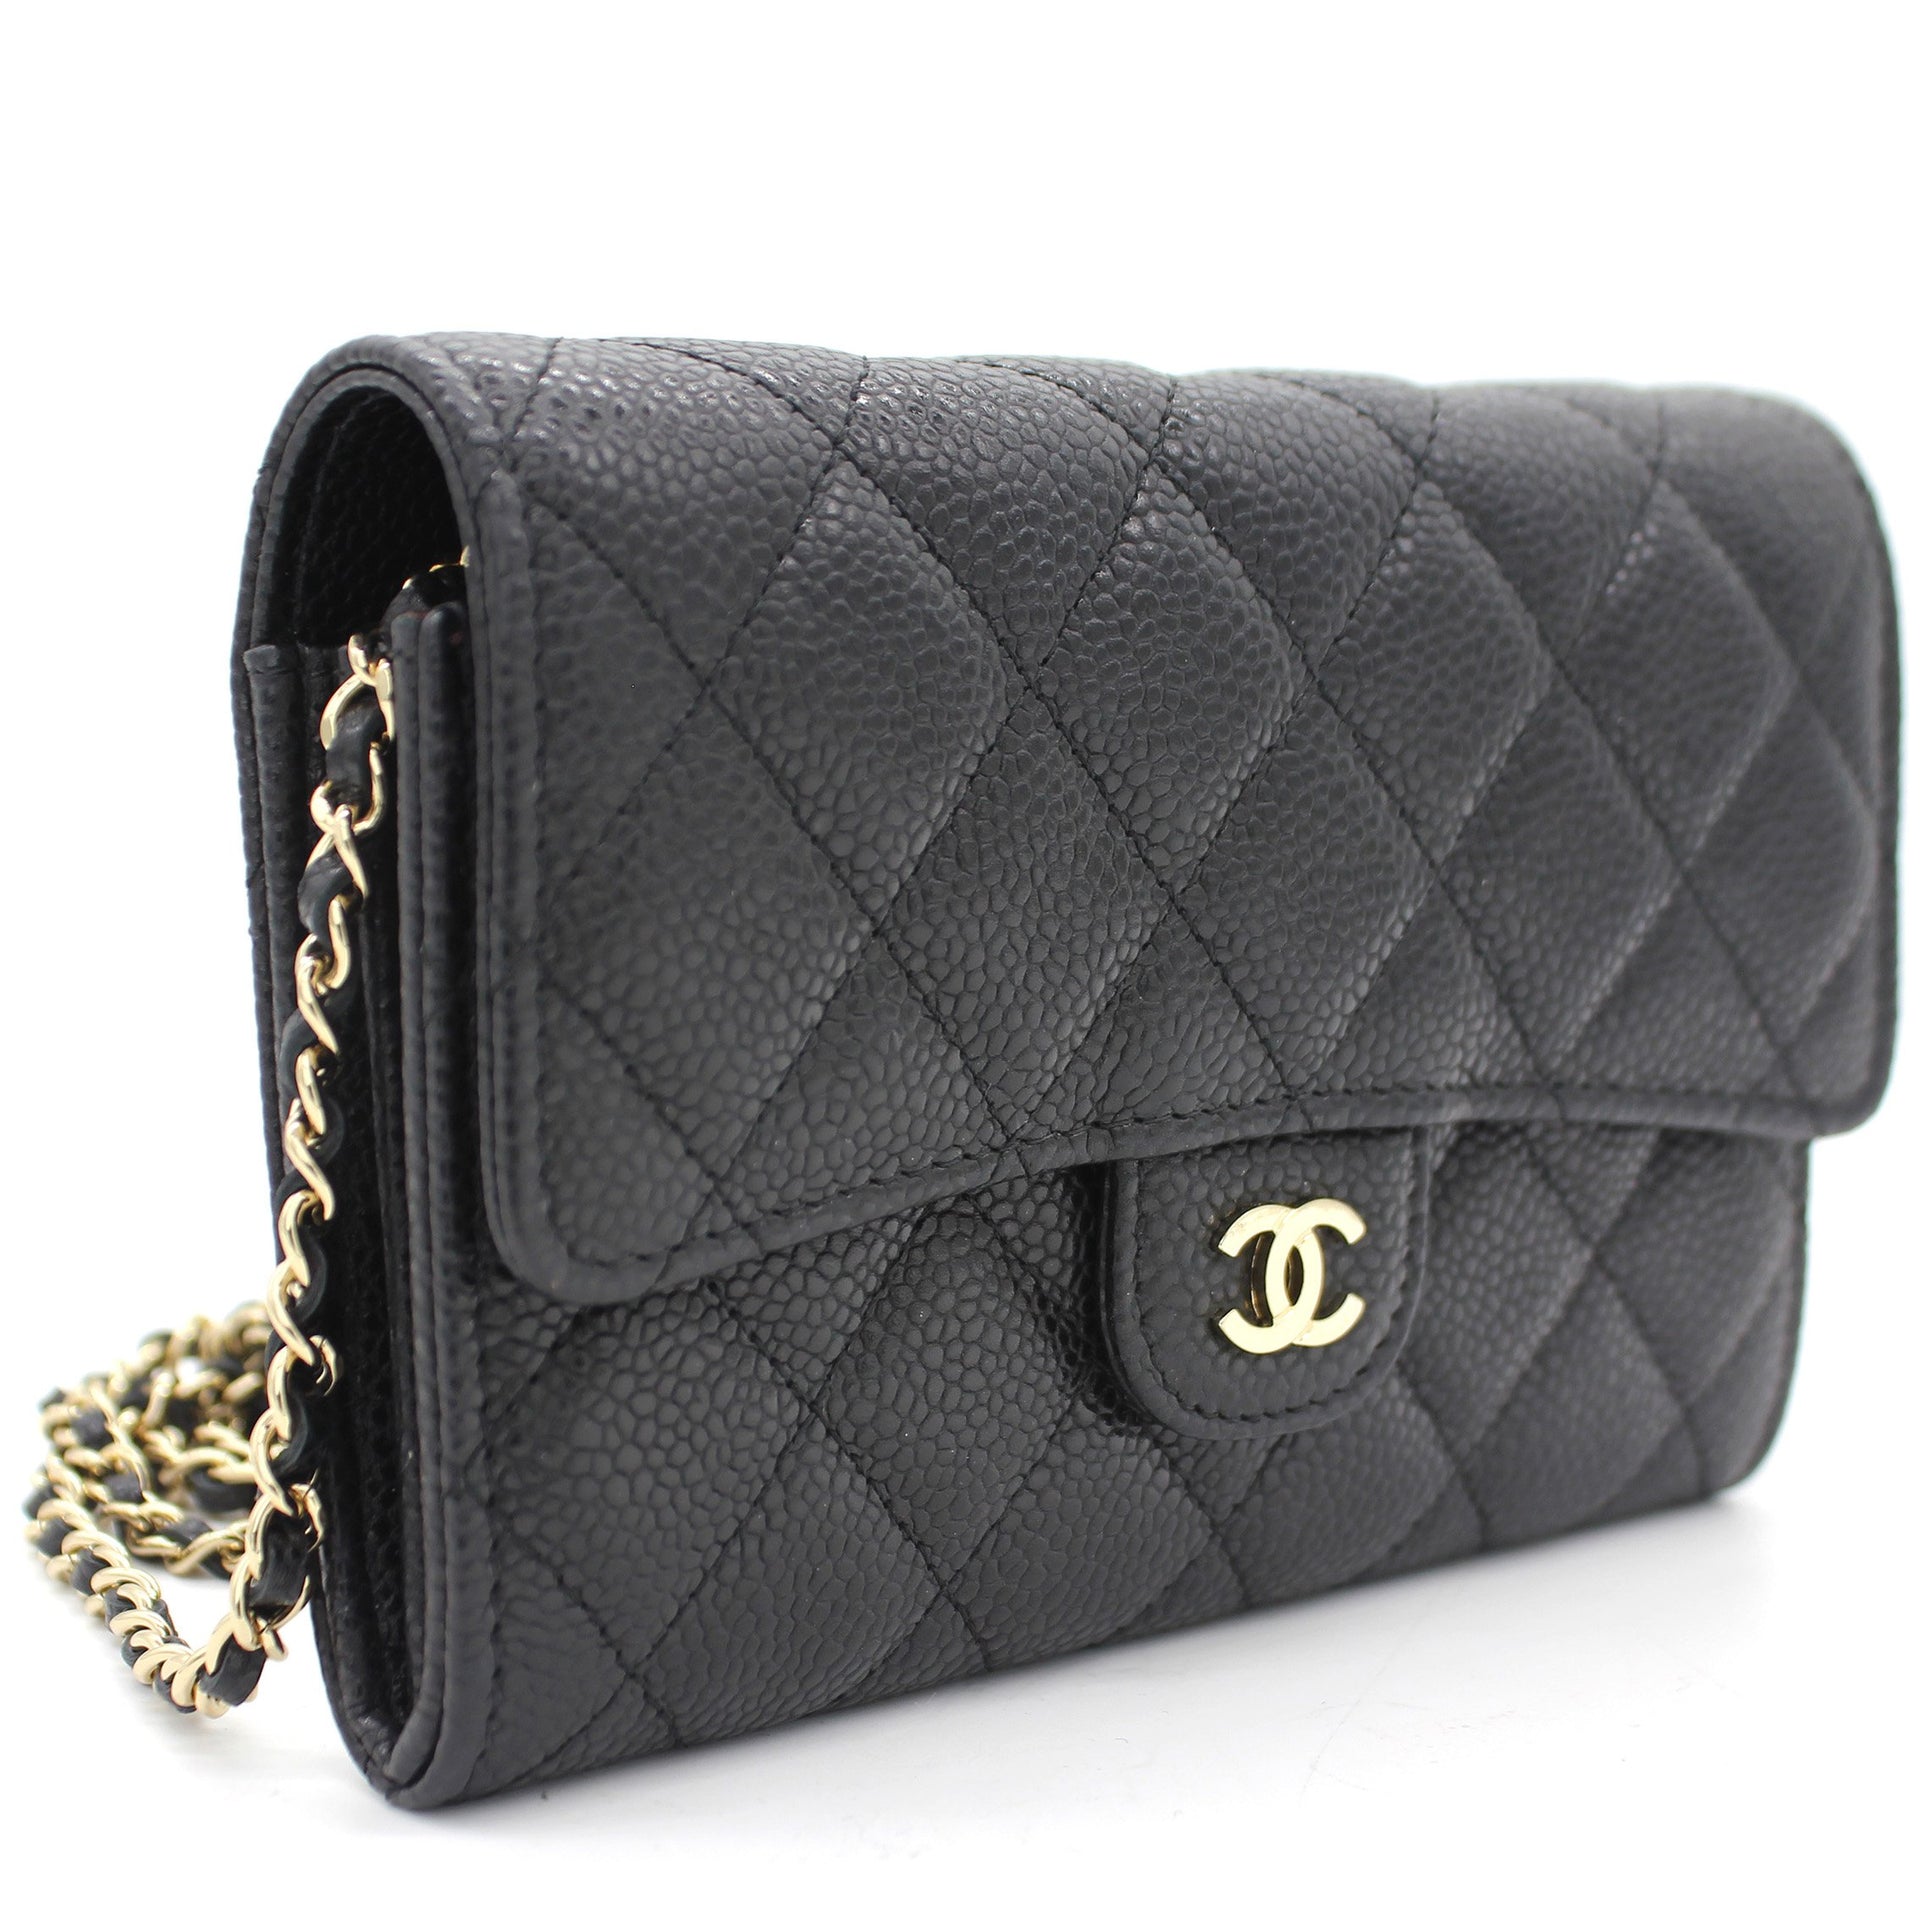 Chanel Black Lambskin Quilted Leather Chanel 19 O Case Clutch Bag Chanel   TLC